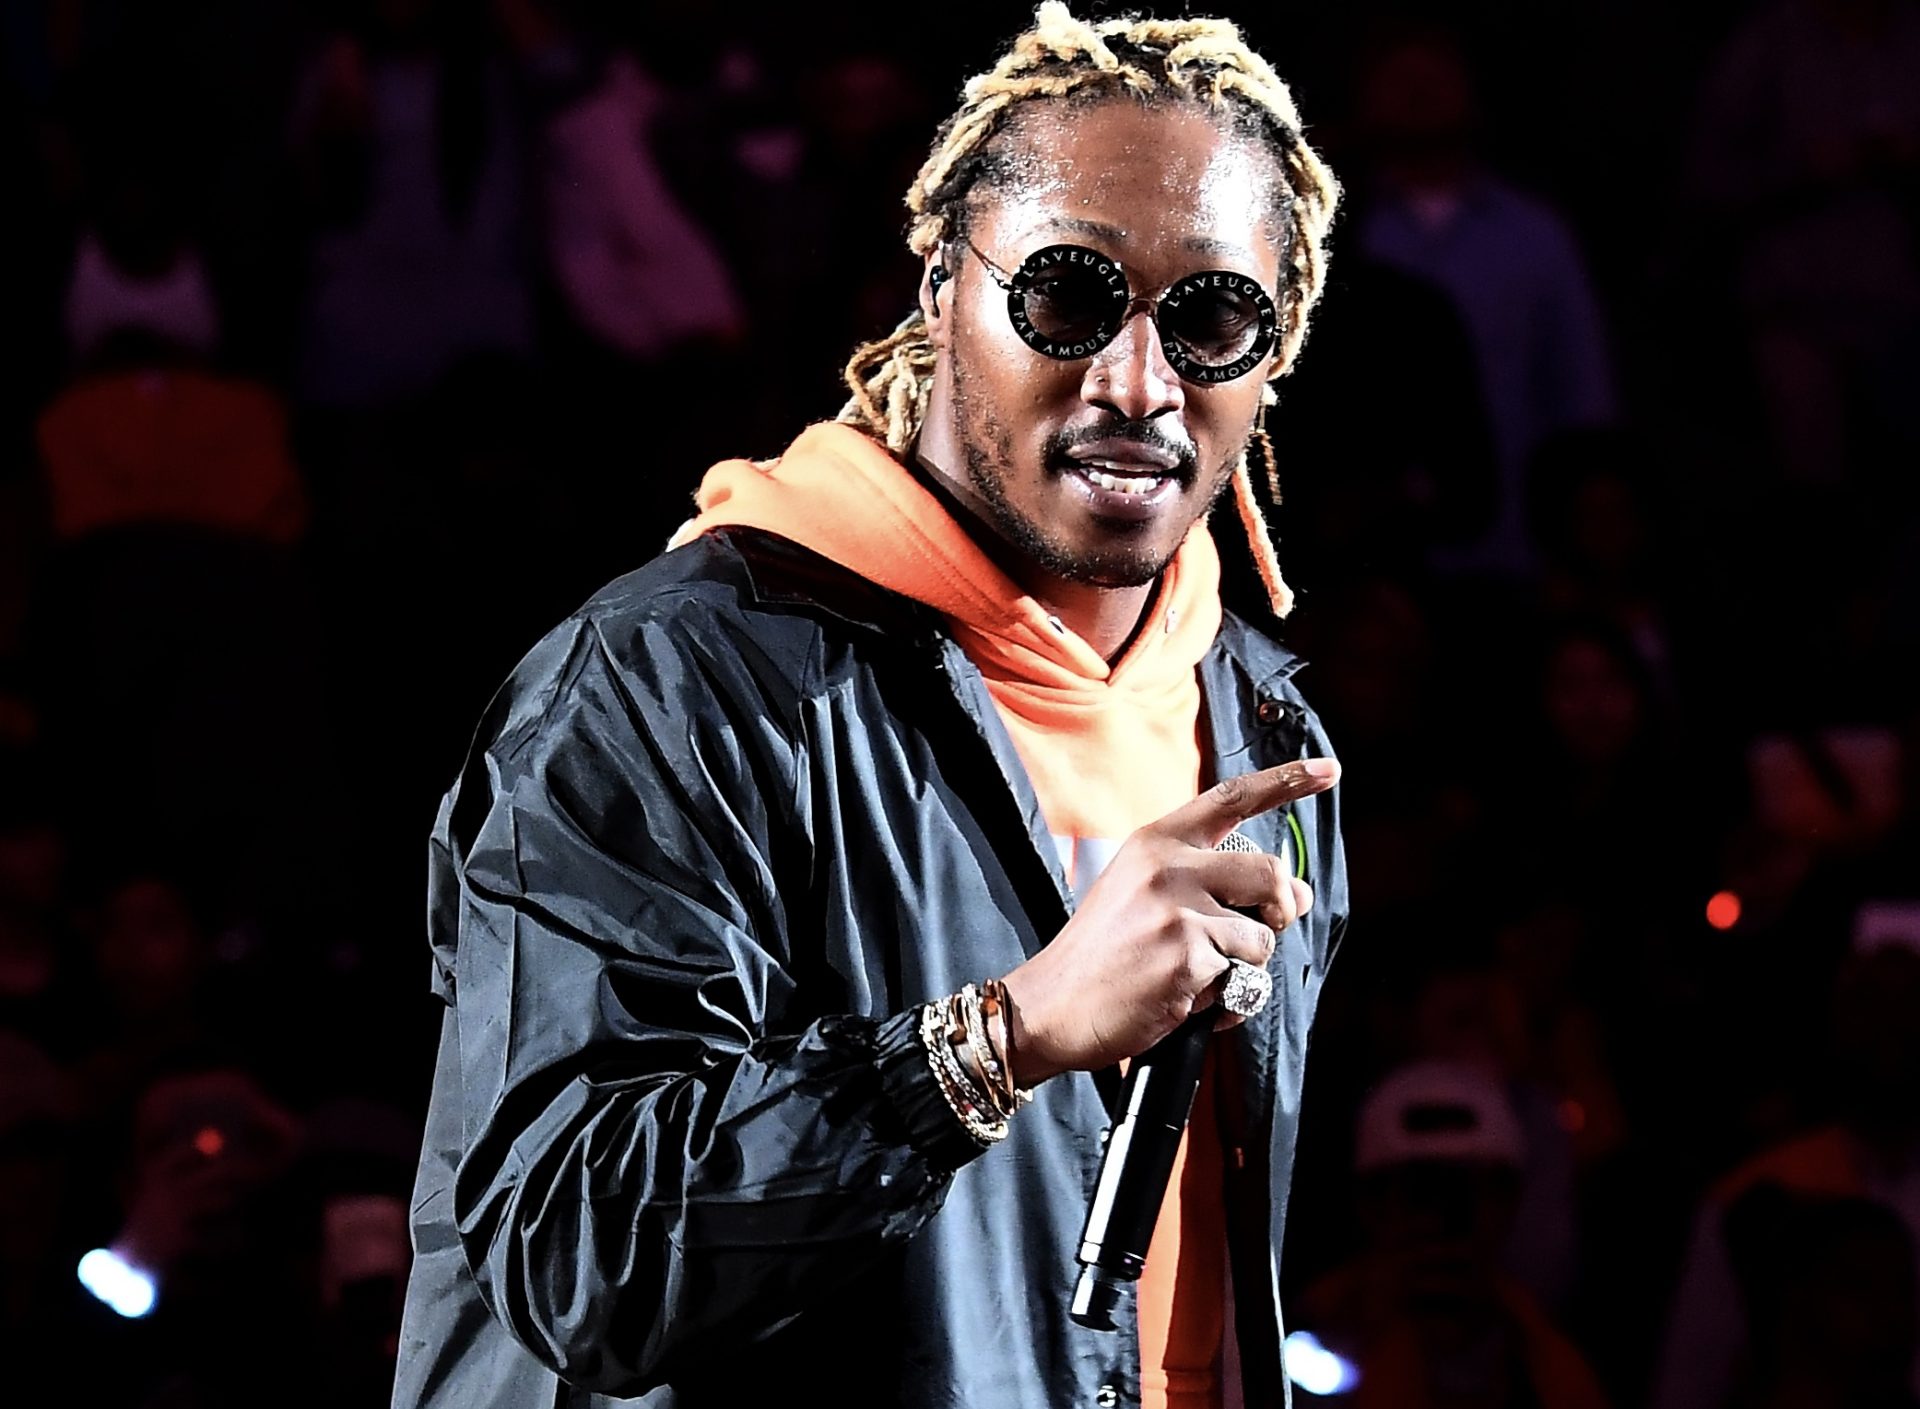 Social Media Reacts To Future Dropping His Latest Album ‘I Never Liked You’